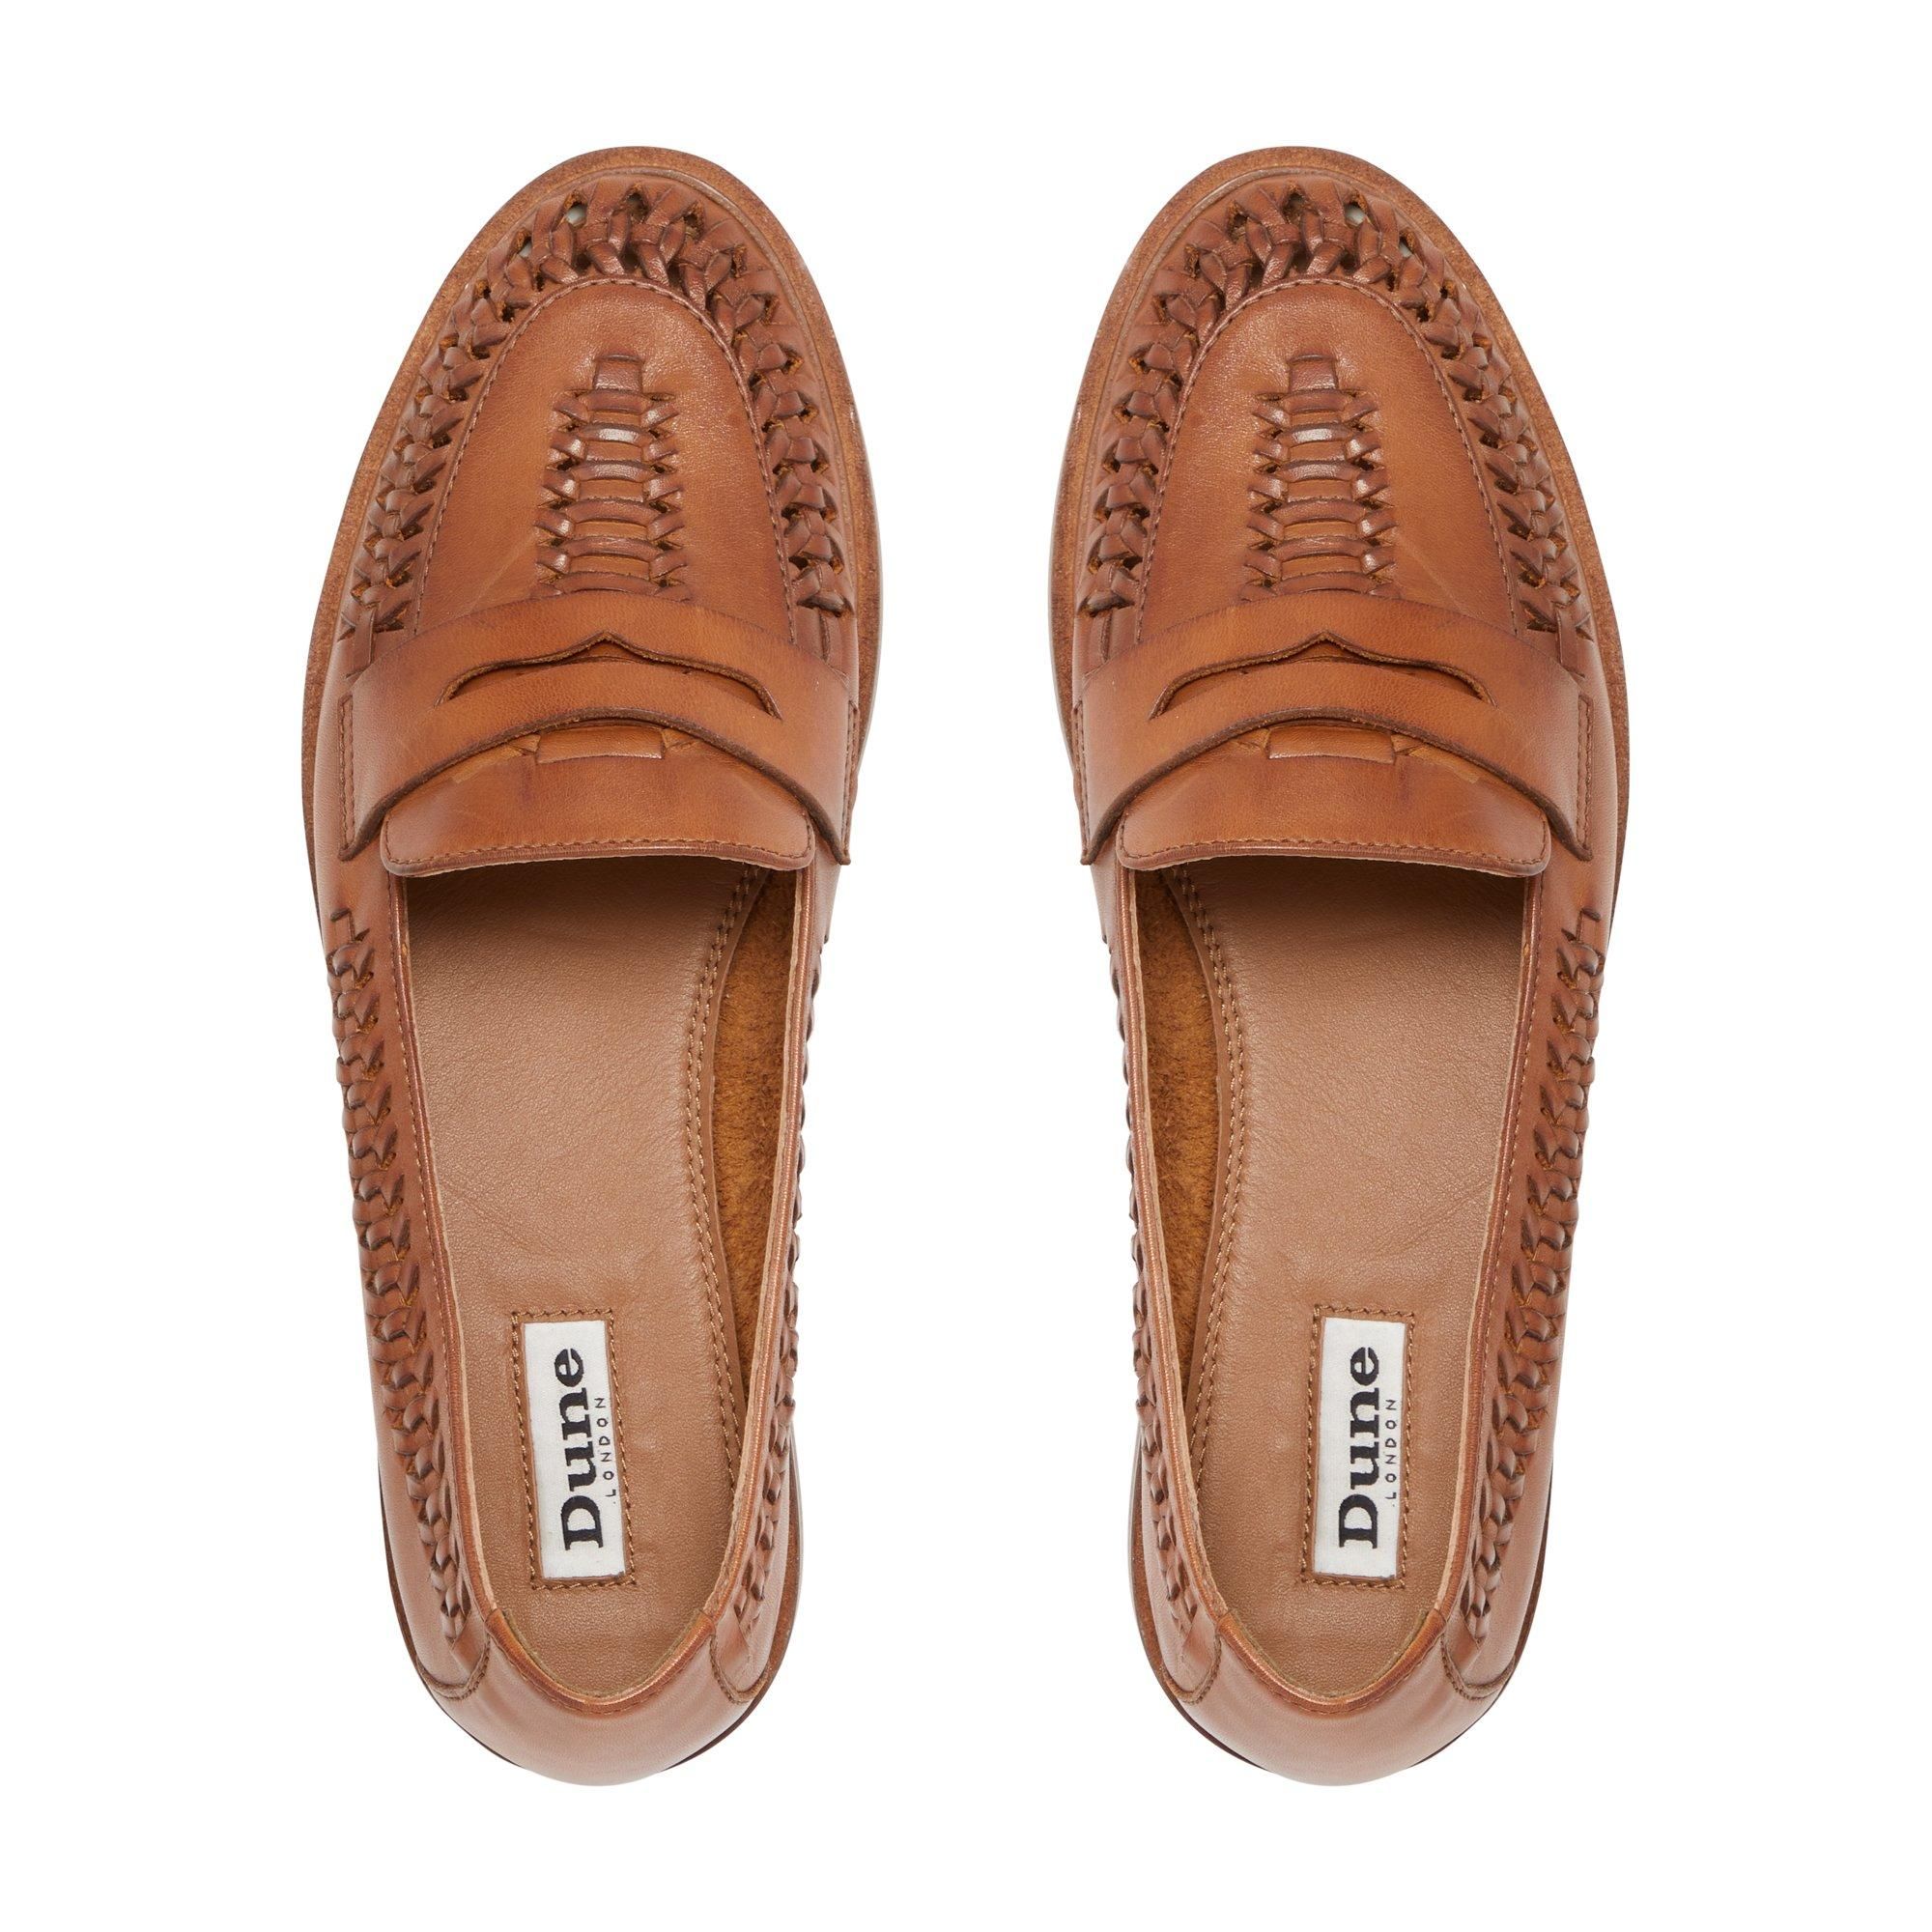 These call for a wardrobe update. Easy to slip on and go, you'll wear these woven loafers with everything. With endless styling possibilities, they're the ultimate all rounder.